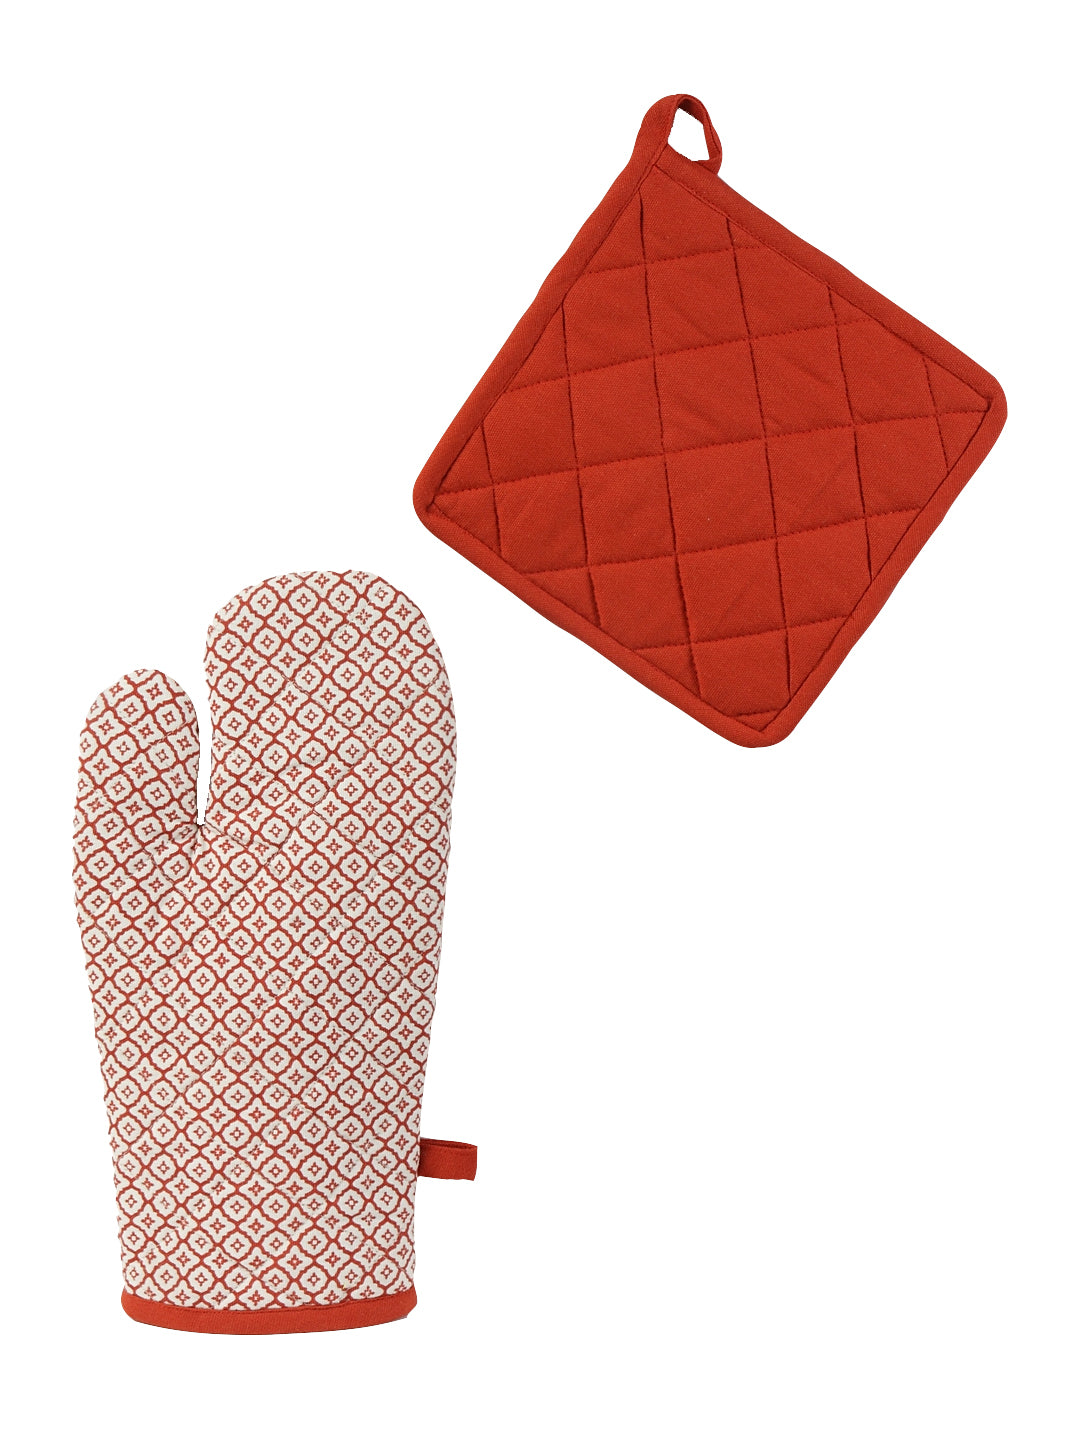 Blanc9 Cooking with Love- Set of Oven Mitt & Pot Holder